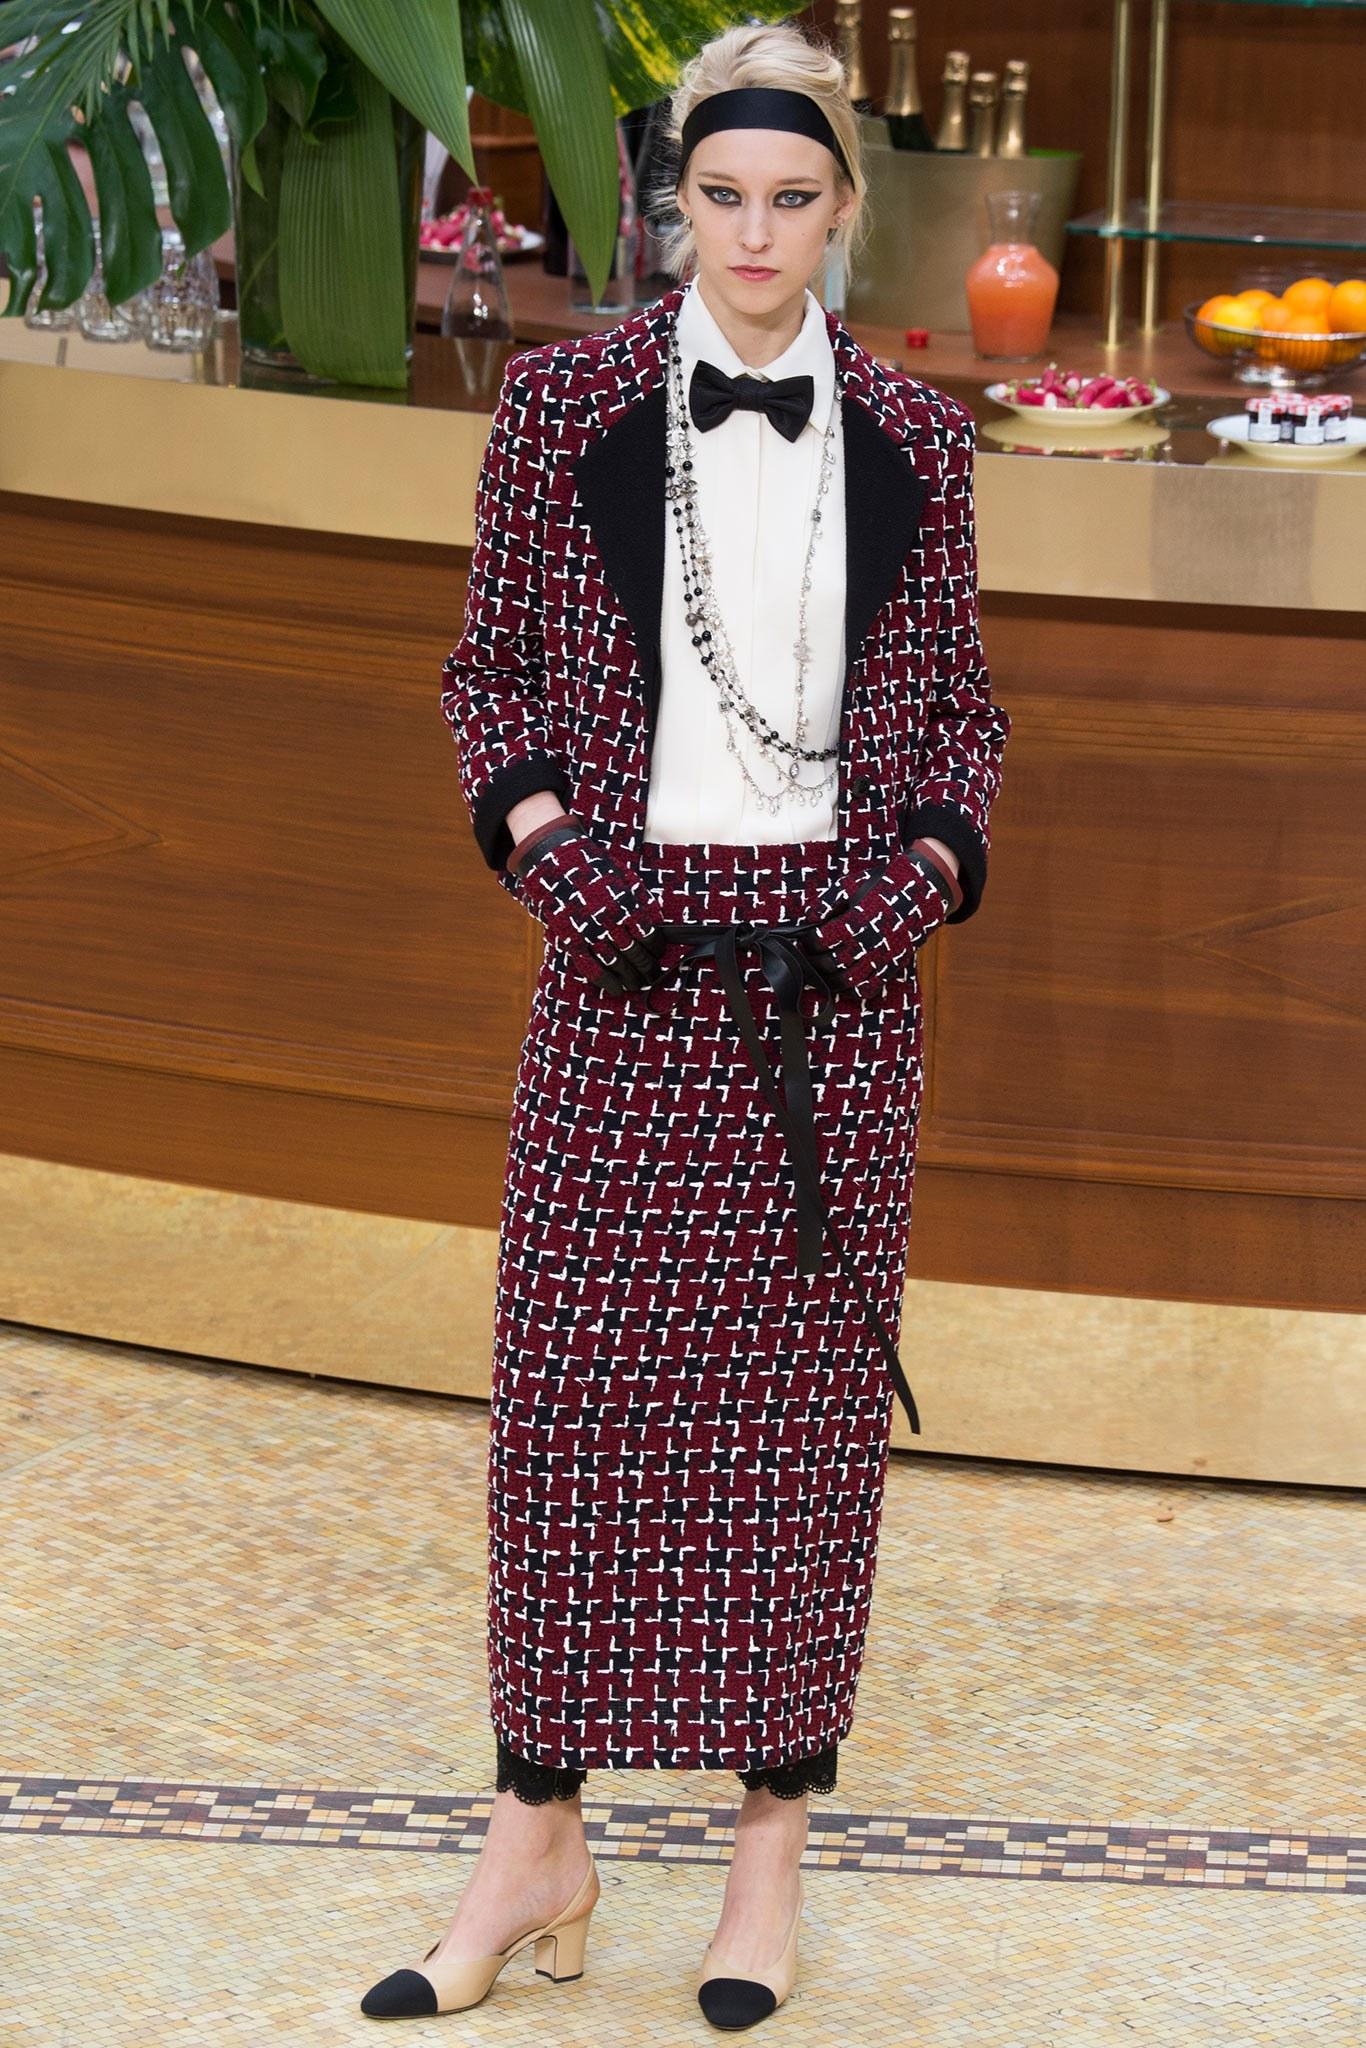 CHANEL Fall 2015 Collection jacket comes in burgundy, navy, and cream houndstooth tweed with a half black notch lapel, three button closure with clear CC buttons, and black trimmed pockets and cuffs. Made in France.  Retailed $5850
 
Excellent